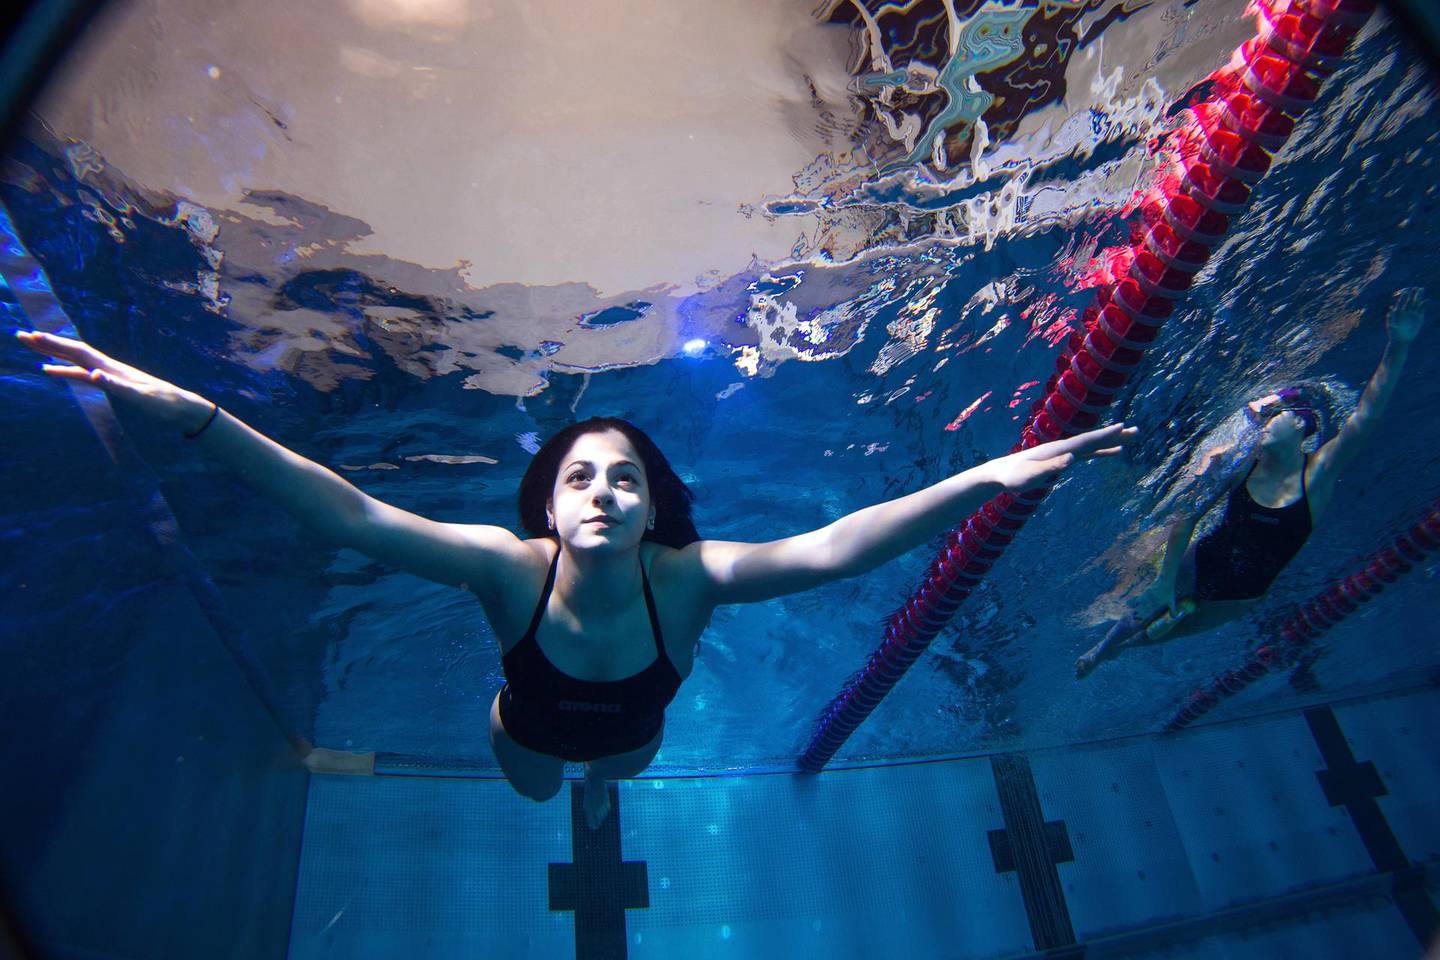 BERLIN, GERMANY - MARCH 09:  Yusra Mardini of Syria during a training session at the Wasserfreunde Spandau 04 training pool Olympiapark Berlin on March 9, 2016 in Berlin, Germany.  (Photo by Alexander Hassenstein/Getty Images for IOC)